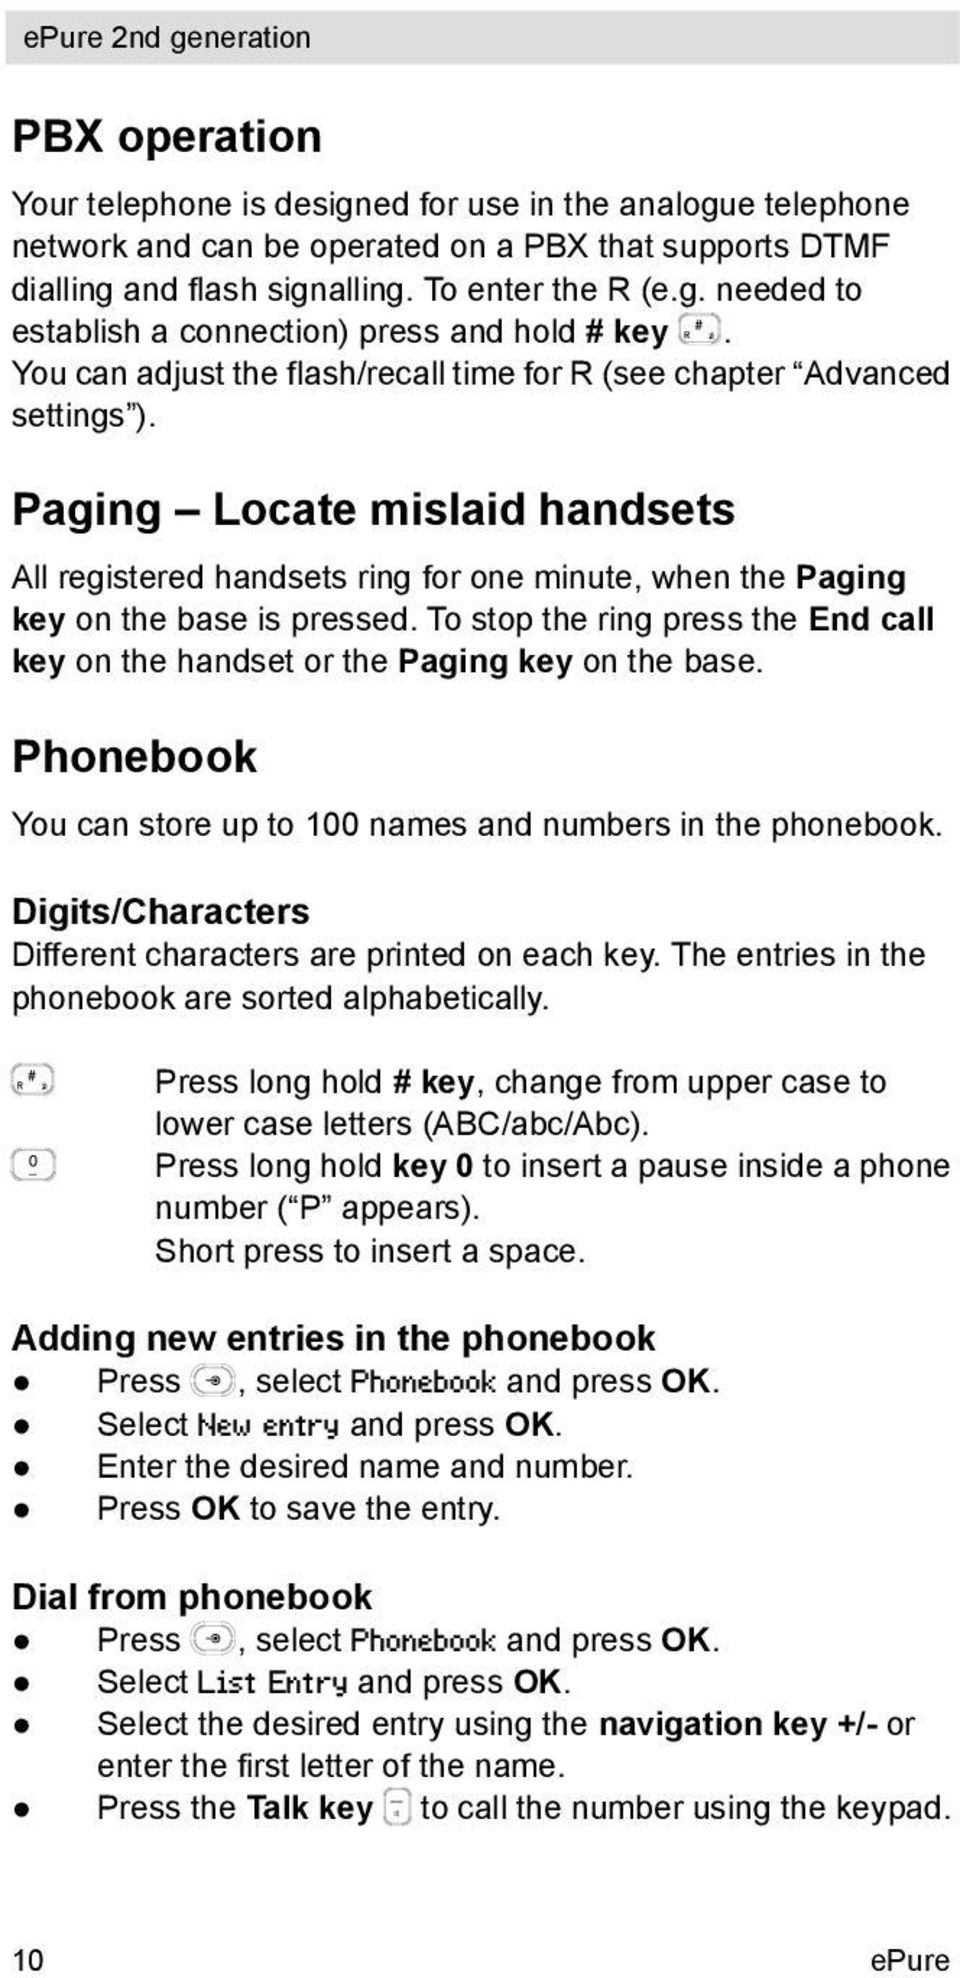 To stop the ring press the End call key on the handset or the Paging key on the base. Phonebook You can store up to 100 names and numbers in the phonebook.